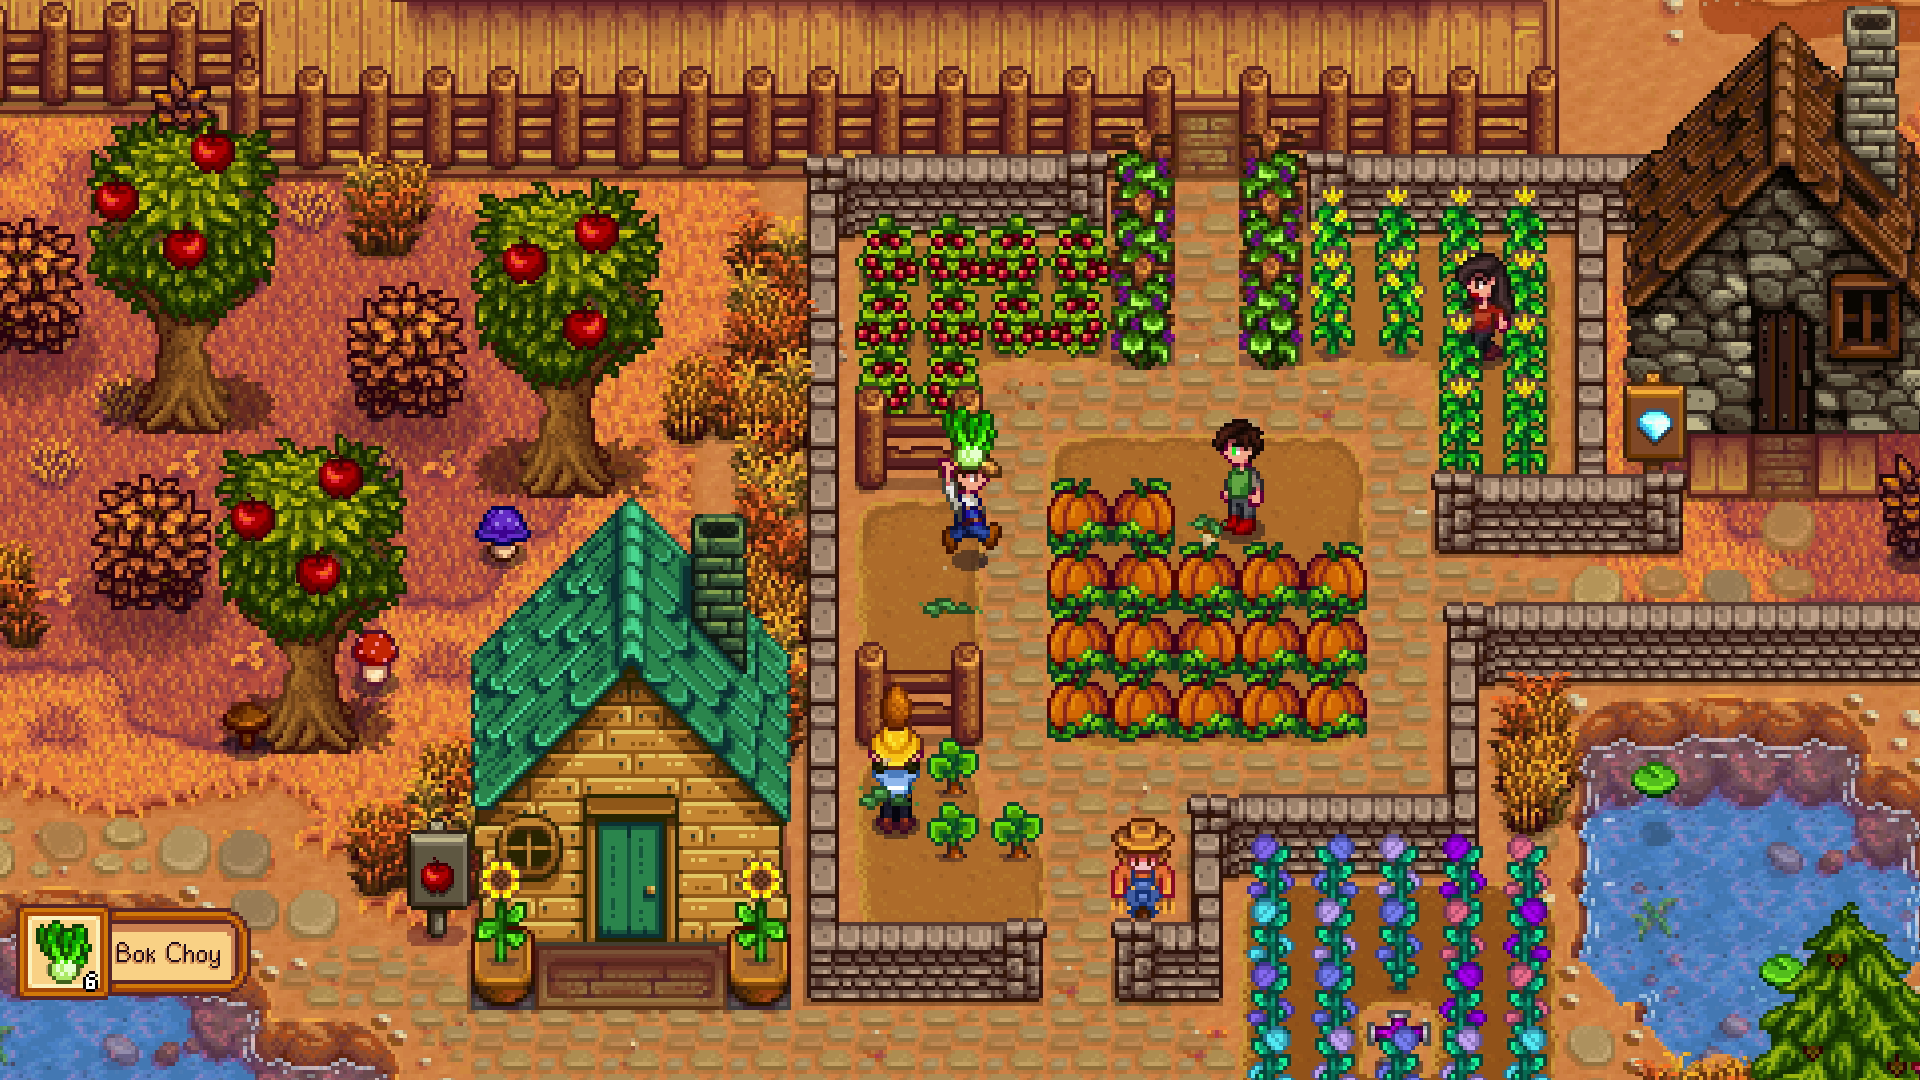 A screenshot from the game Stardew Valley, where the player stands next to a vegetable patch outside their farm. The game implements retro graphics, and a top-down view of the world, common on older video games.